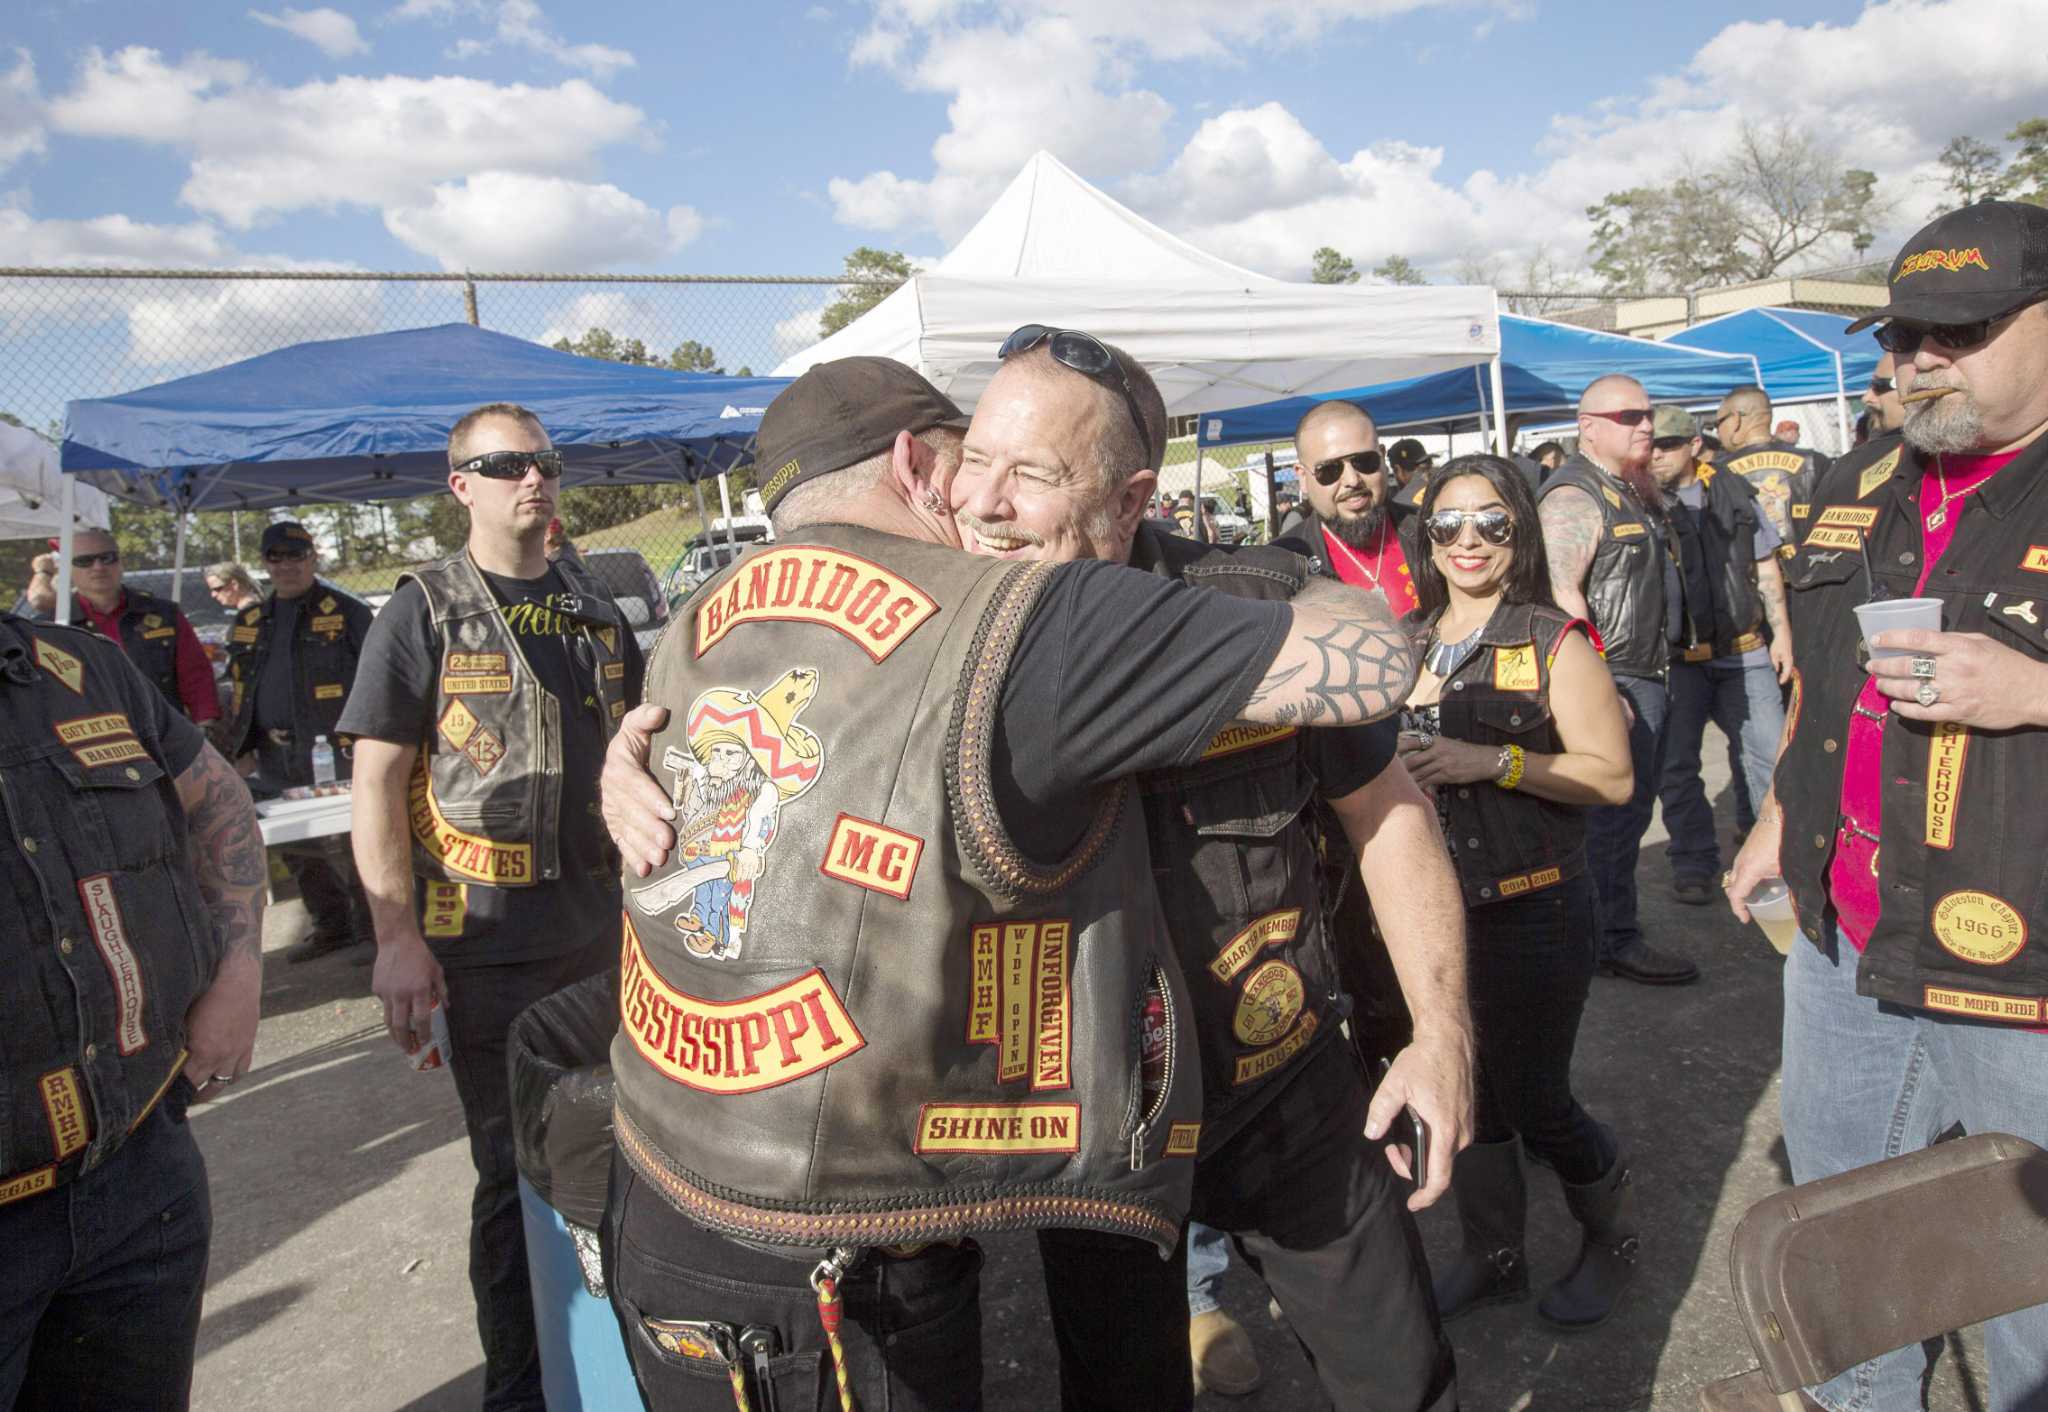 Bandidos Inc.: Tough-as-nails riders are now a nonprofit group